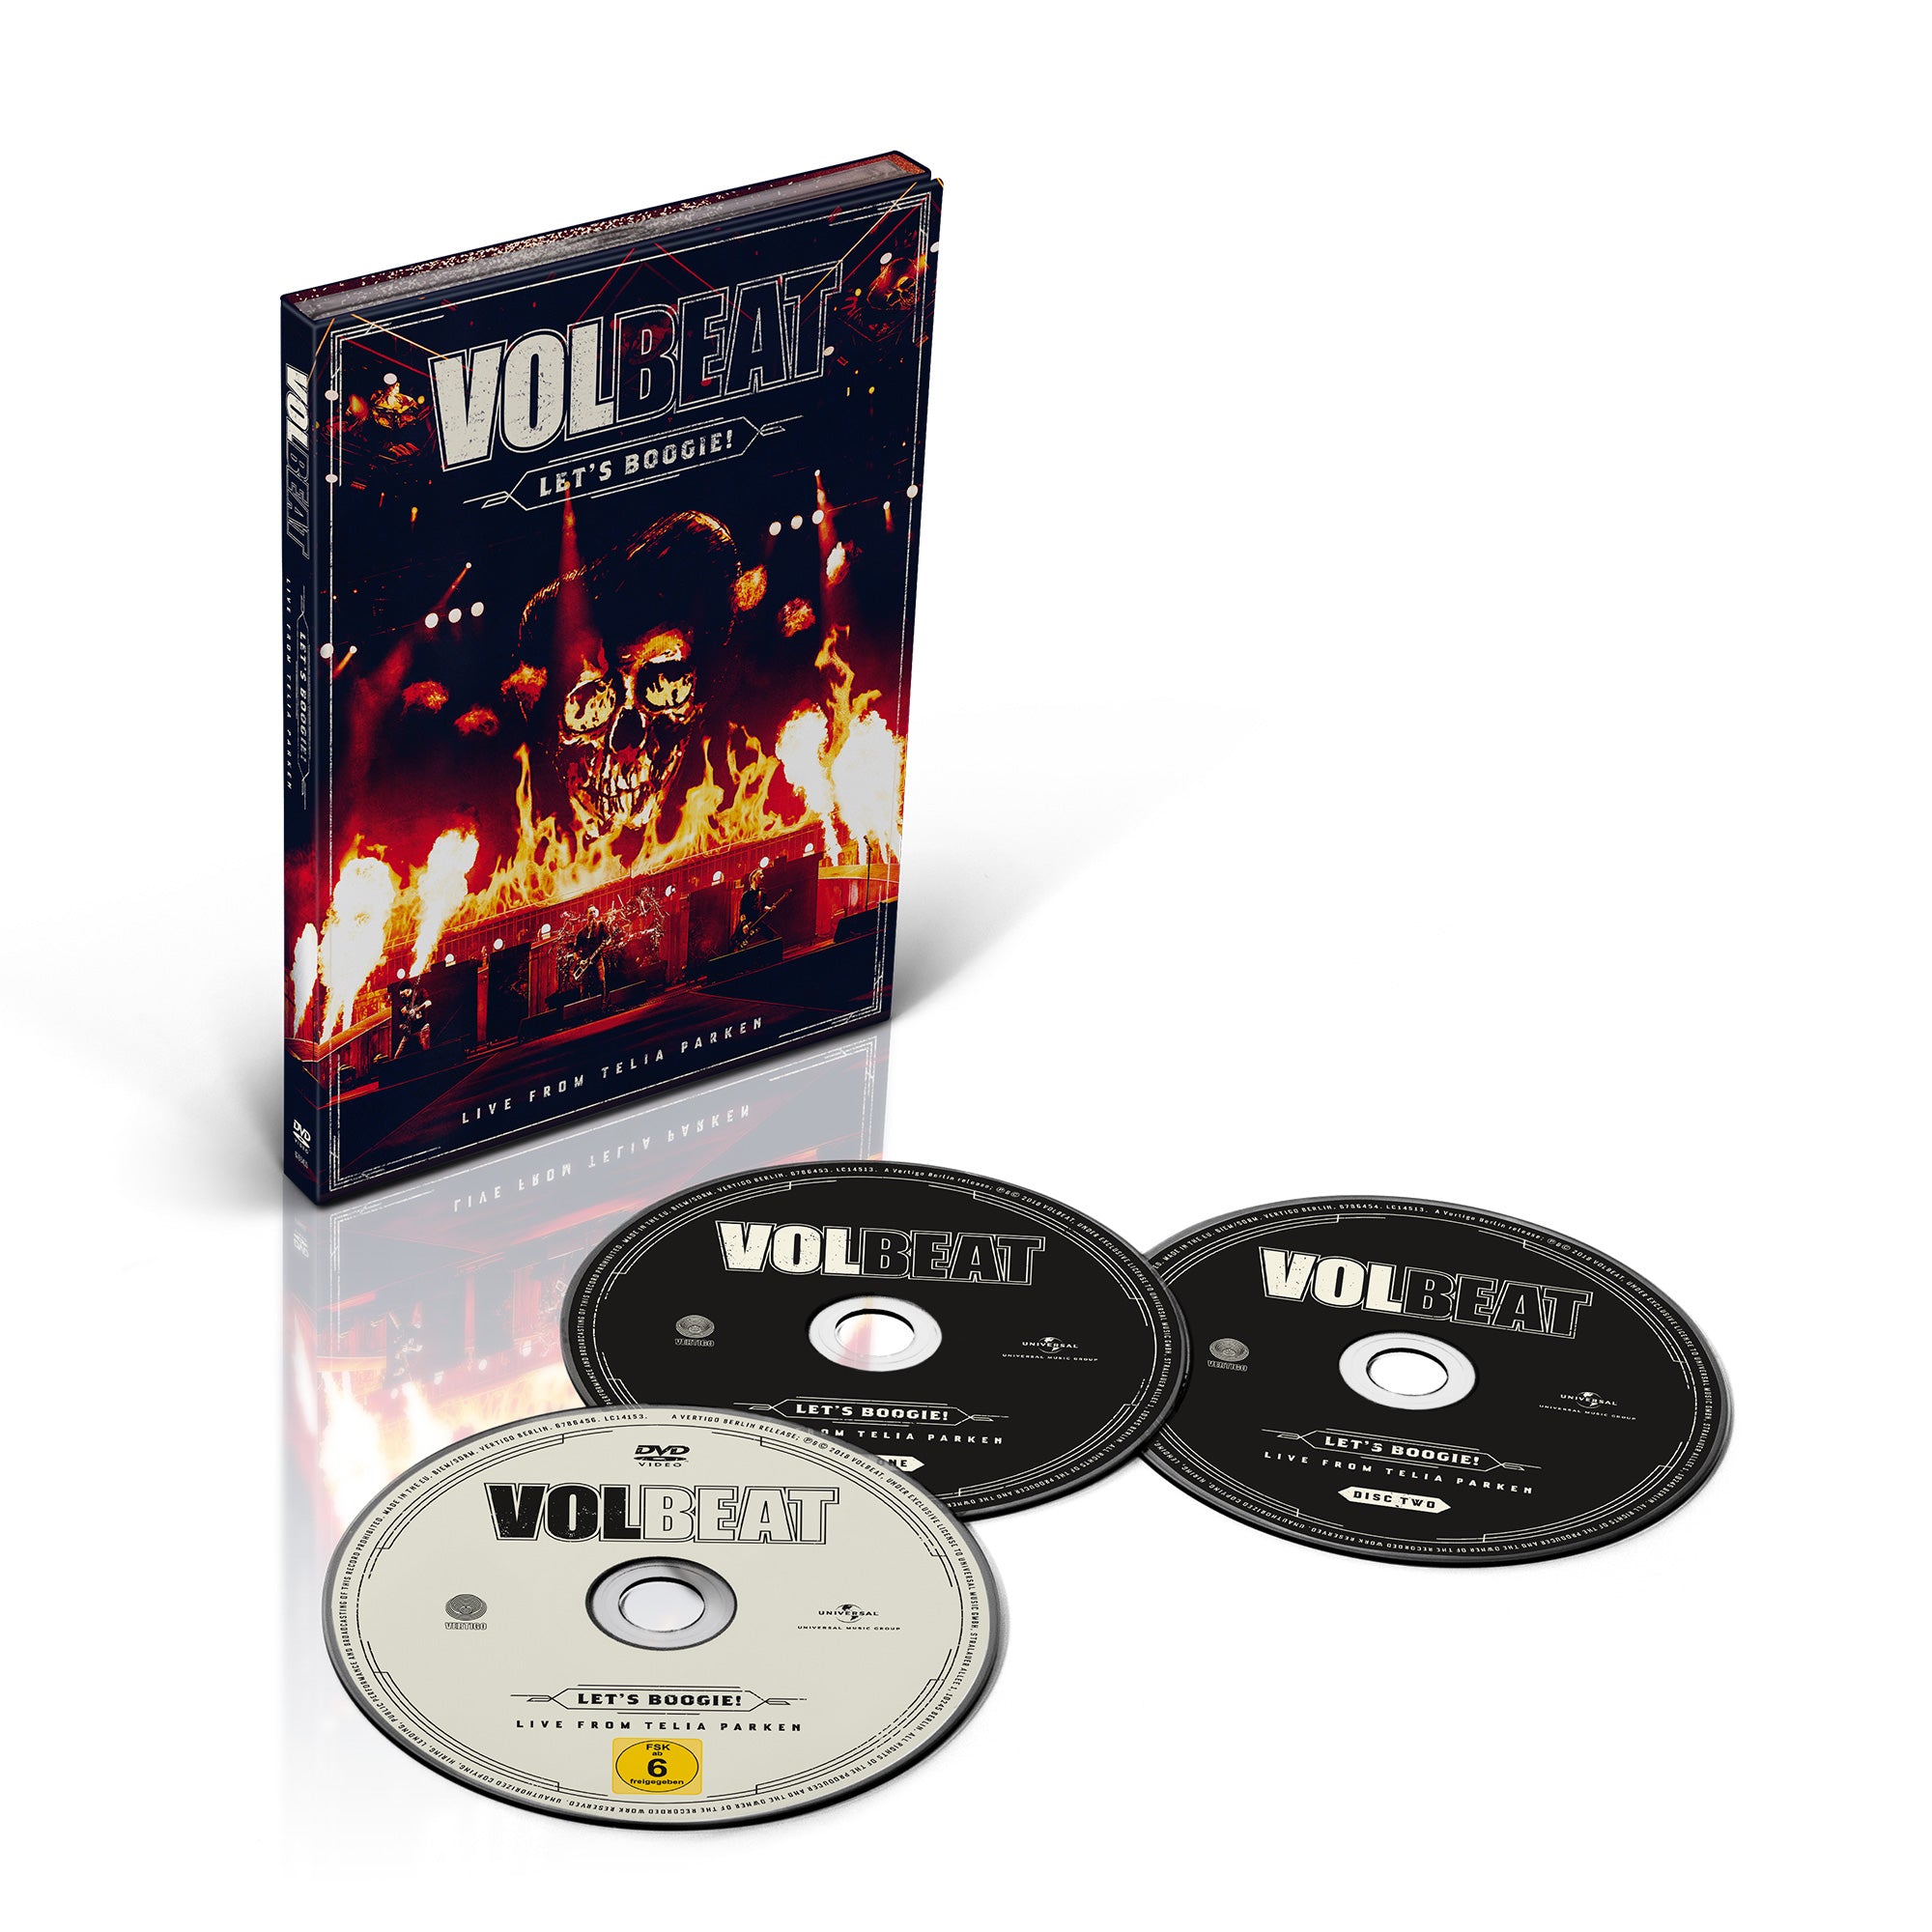 Volbeat - Let's Boogie! Limited 2CD + DVD